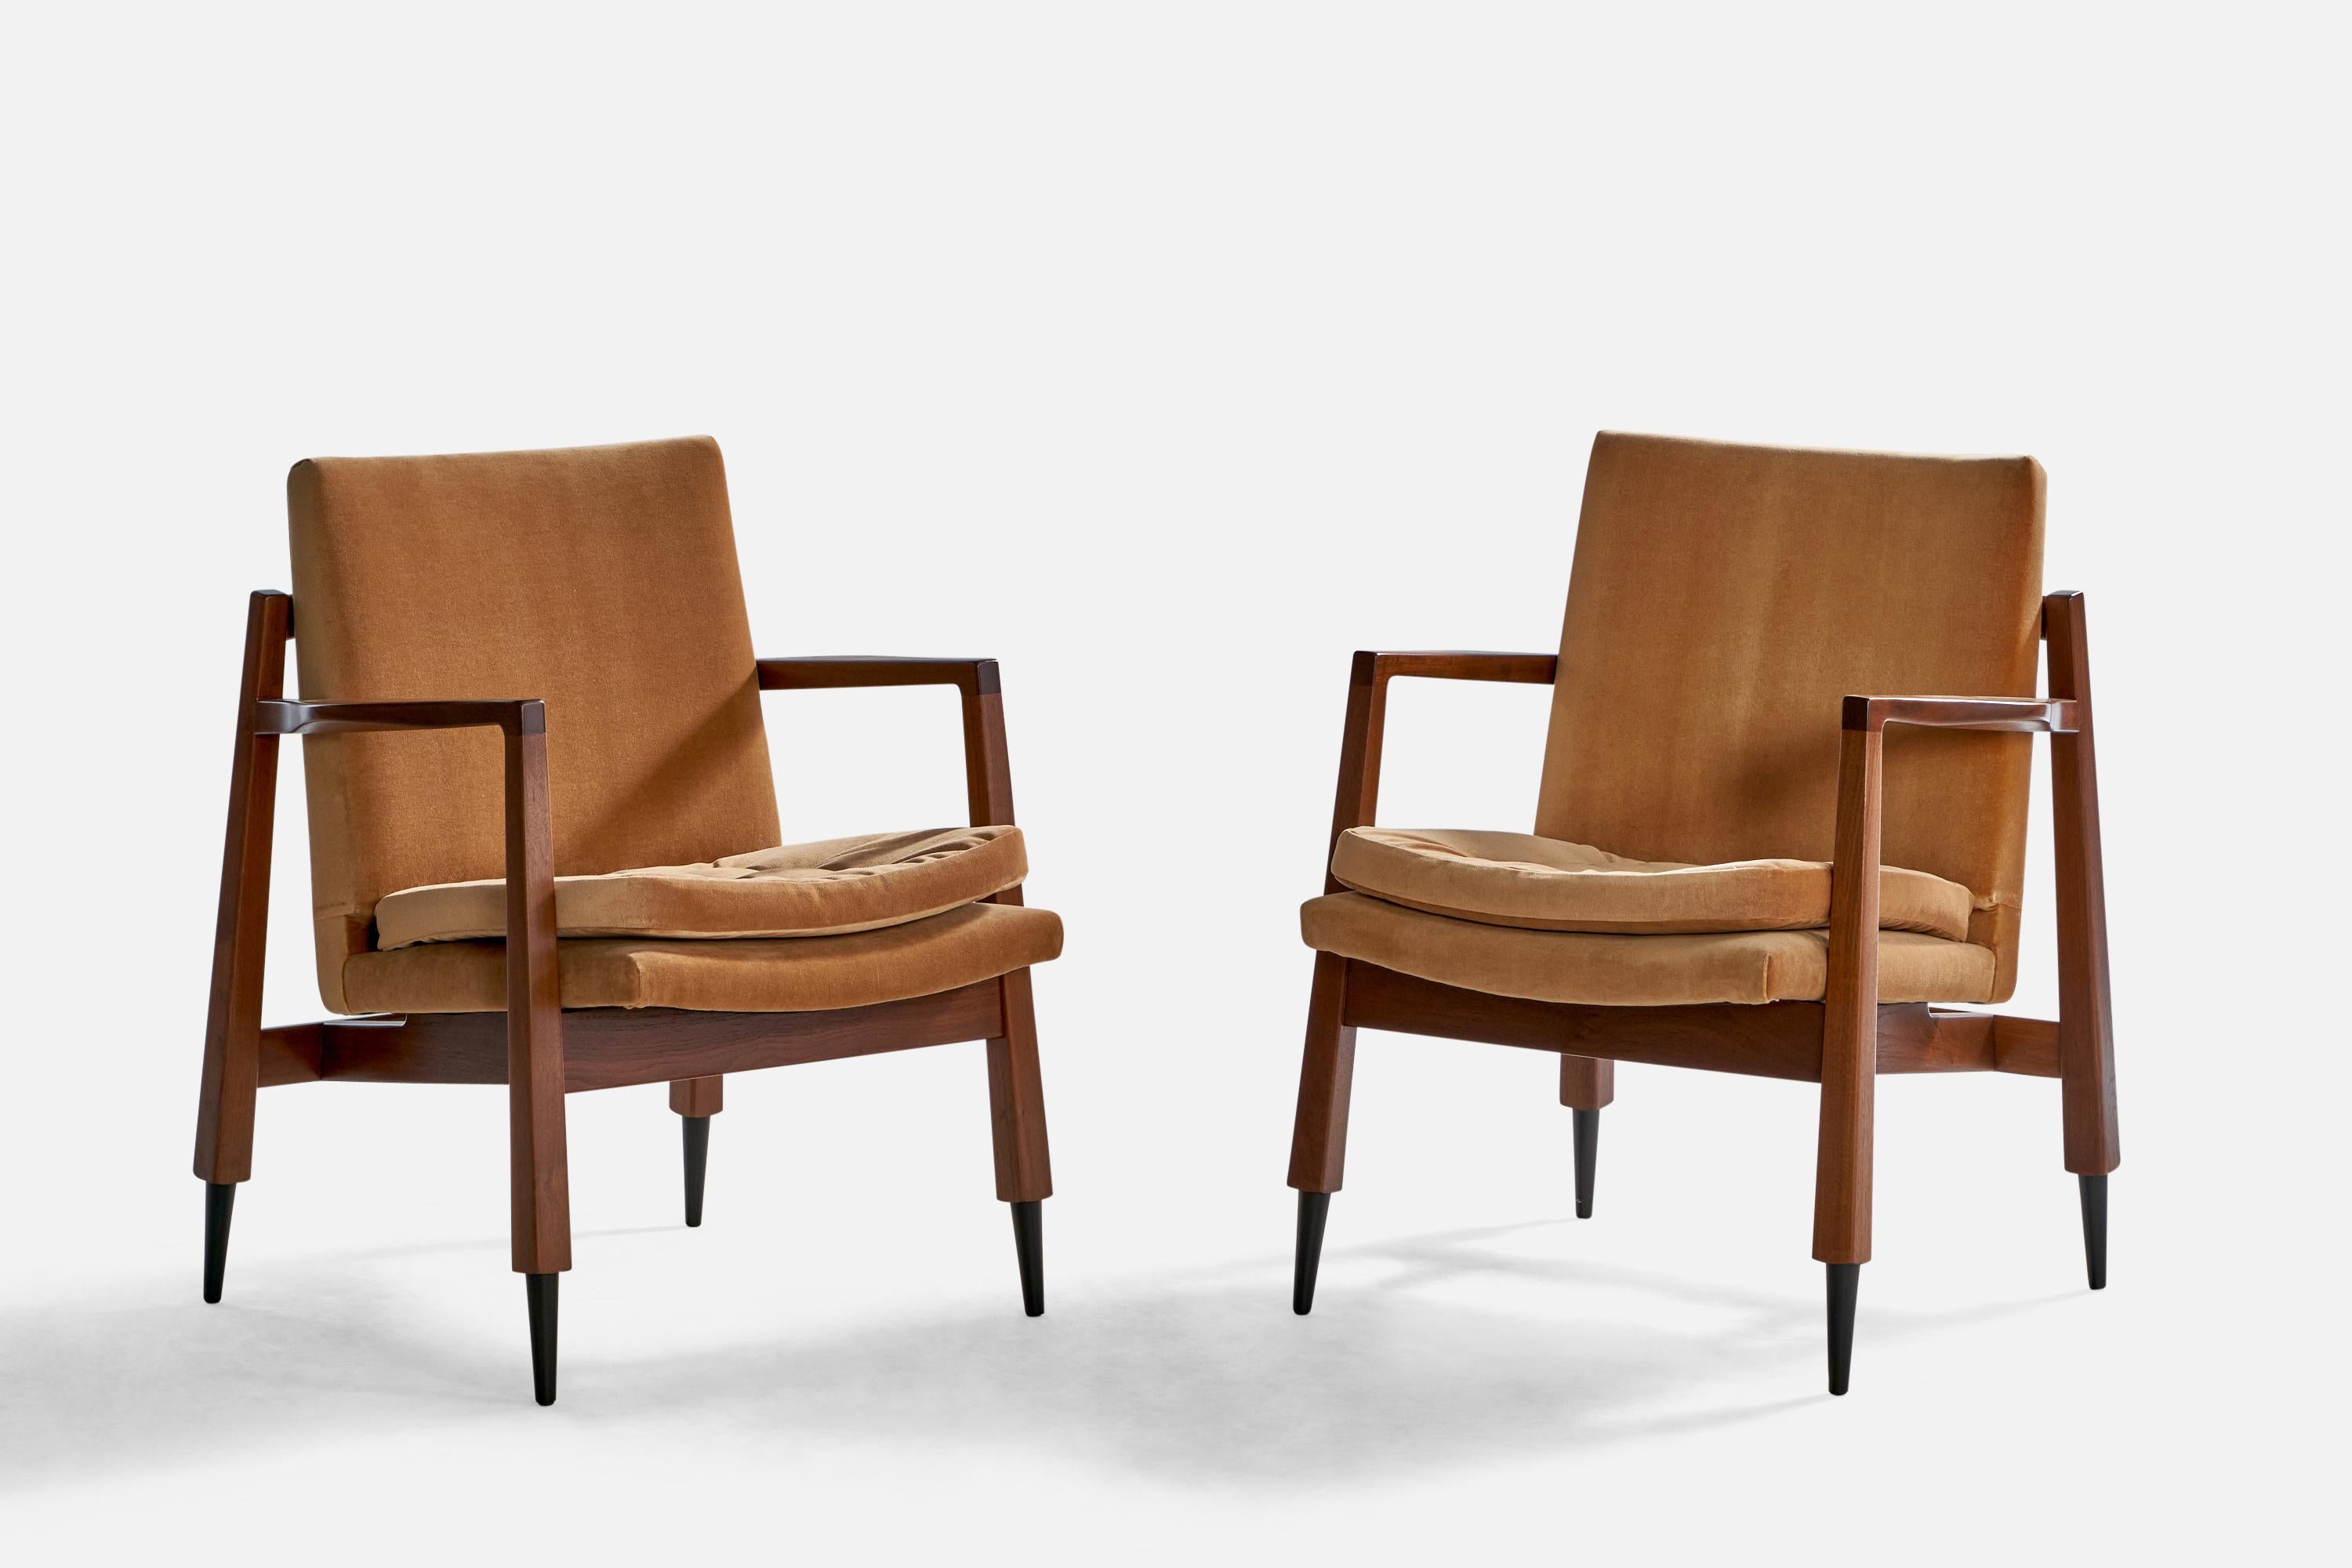 A pair of walnut, beige velvet and metal armchairs or lounge chairs designed by Gerald Luss and produced by Leigh Furniture, USA, 1950s.

Seat height: 19.5”